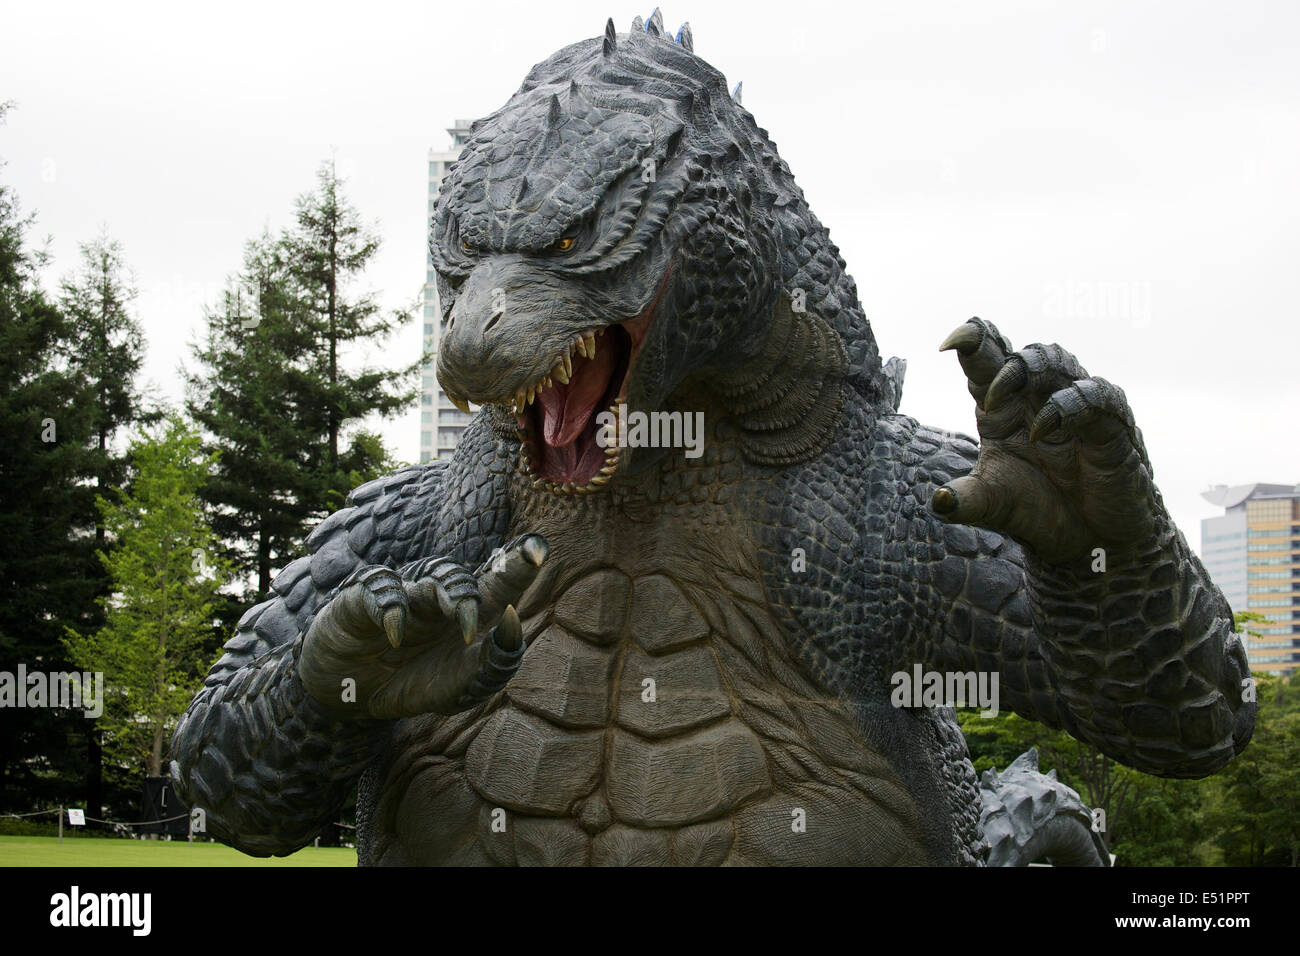 Tokyo, Japan. 18th July, 2014. A 6.6 meter model of the new Godzilla is displayed at Tokyo Midtown on July 18, 2014, Tokyo. The statue is a 1/7 scale reproduction of the 180 meters tall Hollywood film version of 'GODZILLA'. Godzilla and its footprints will be displayed from July 18 to August 31 during which time it will perform a special show using mist, light and sound effects every 30 minutes between 19:00 to 21:00. Credit:  Rodrigo Reyes Marin/AFLO/Alamy Live News Stock Photo